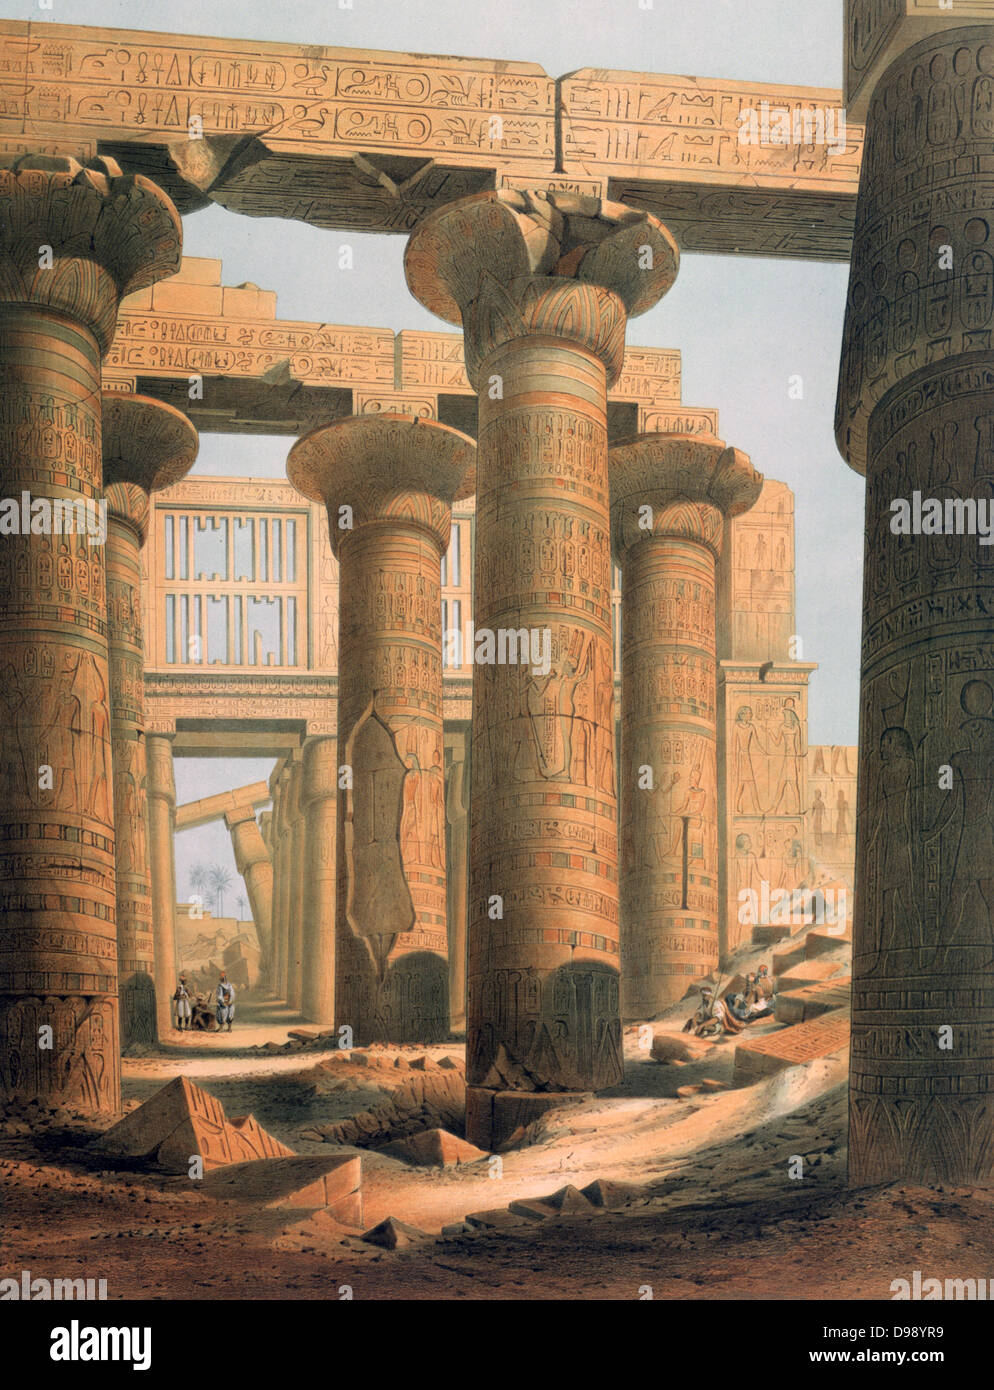 Interior view of the Hall at Karnak'. Lithograph after Karl Richard Lepsius (1810-1884) Prussian Egyptologist. Hippostyle Hall in Karnak temple complex at Thebes (Luxor). Archaeology Religion Mythology Ancient Egyptian Stock Photo